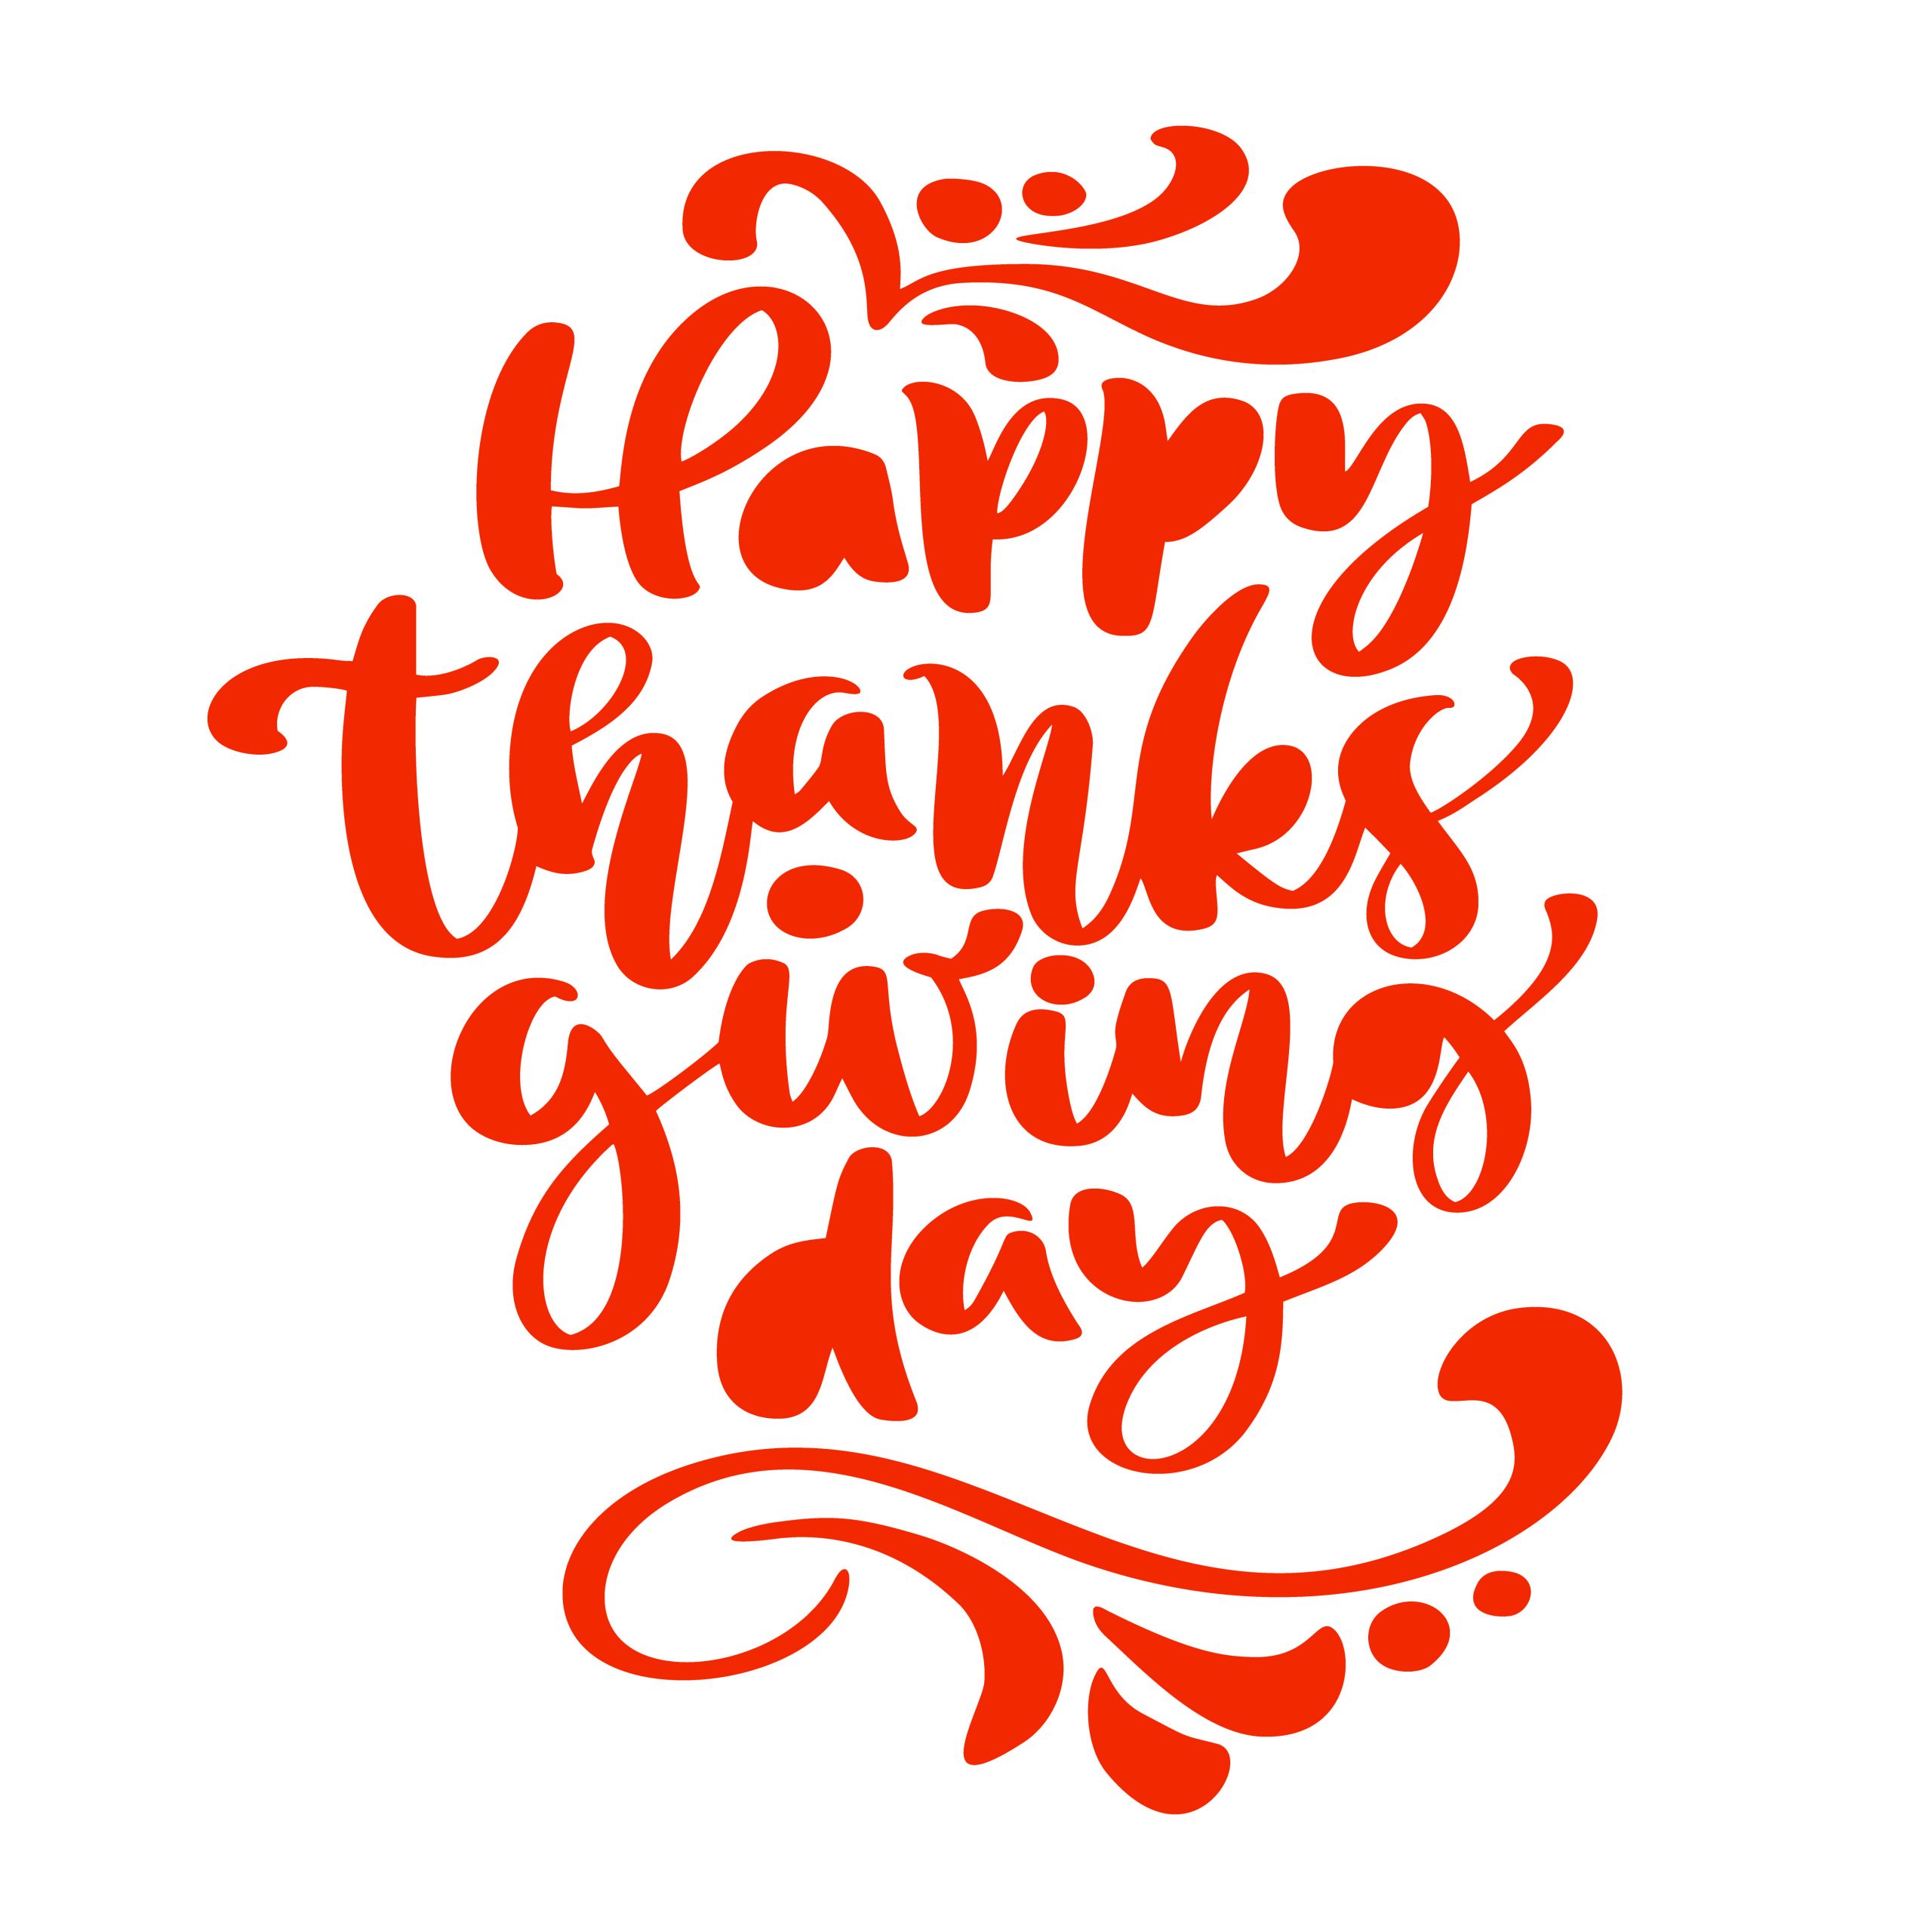 Thanksgiving Quotes Calligraphy
 Happy Thanksgiving Day Calligraphy Text vector